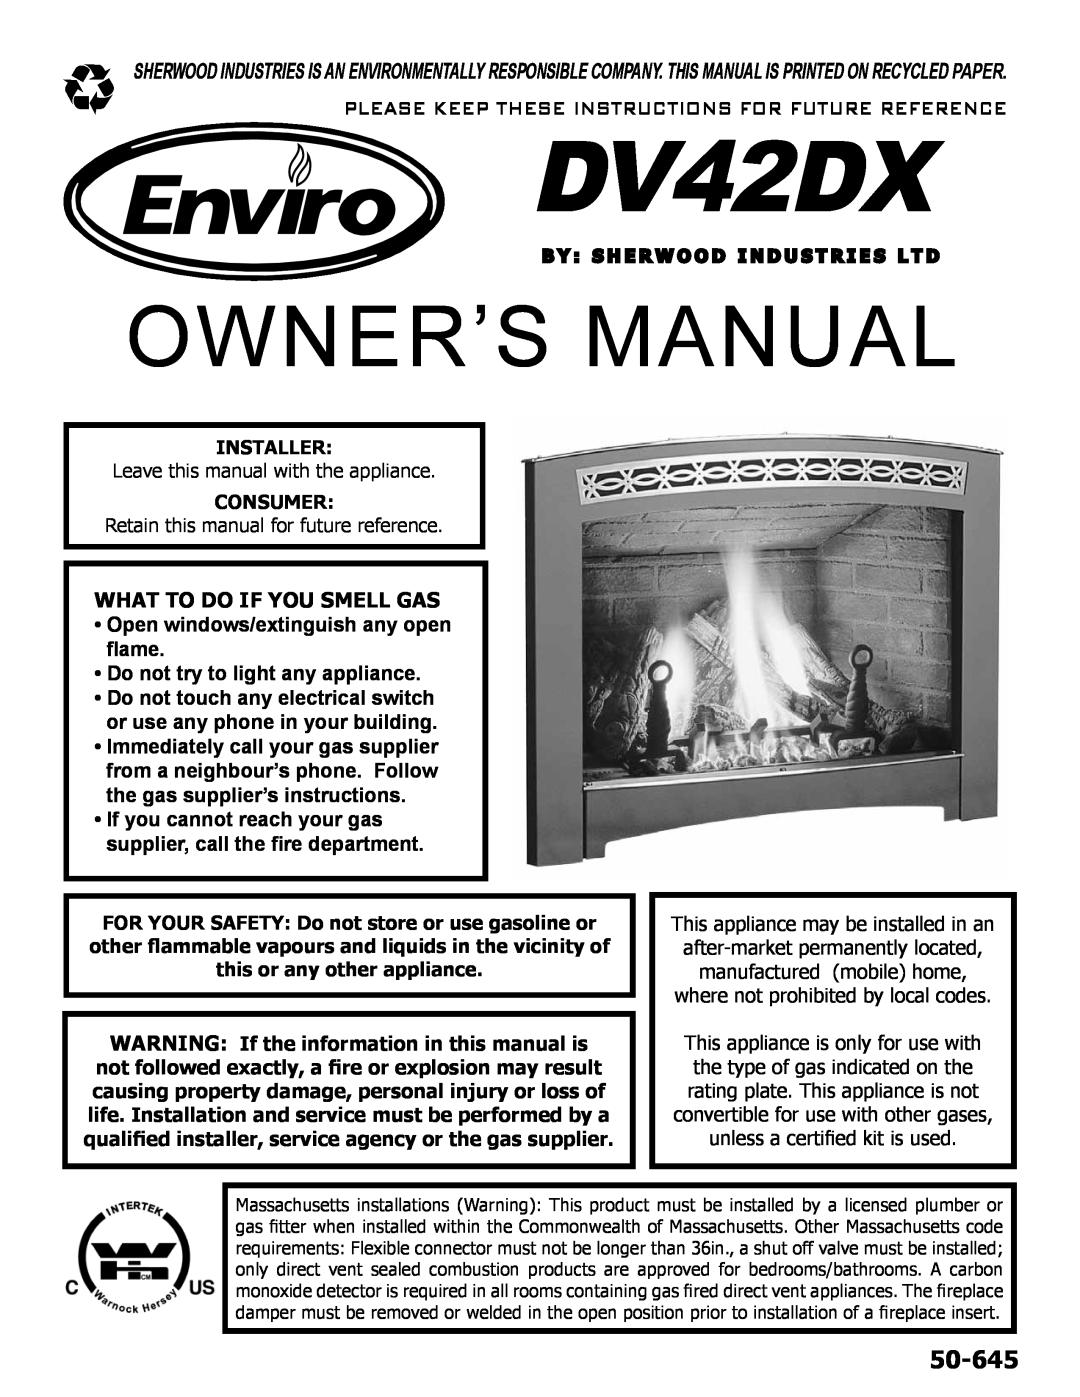 Enviro C-10078, C-11278 owner manual 50-645, What To Do If You Smell Gas, Installer, Consumer, DV42DX 